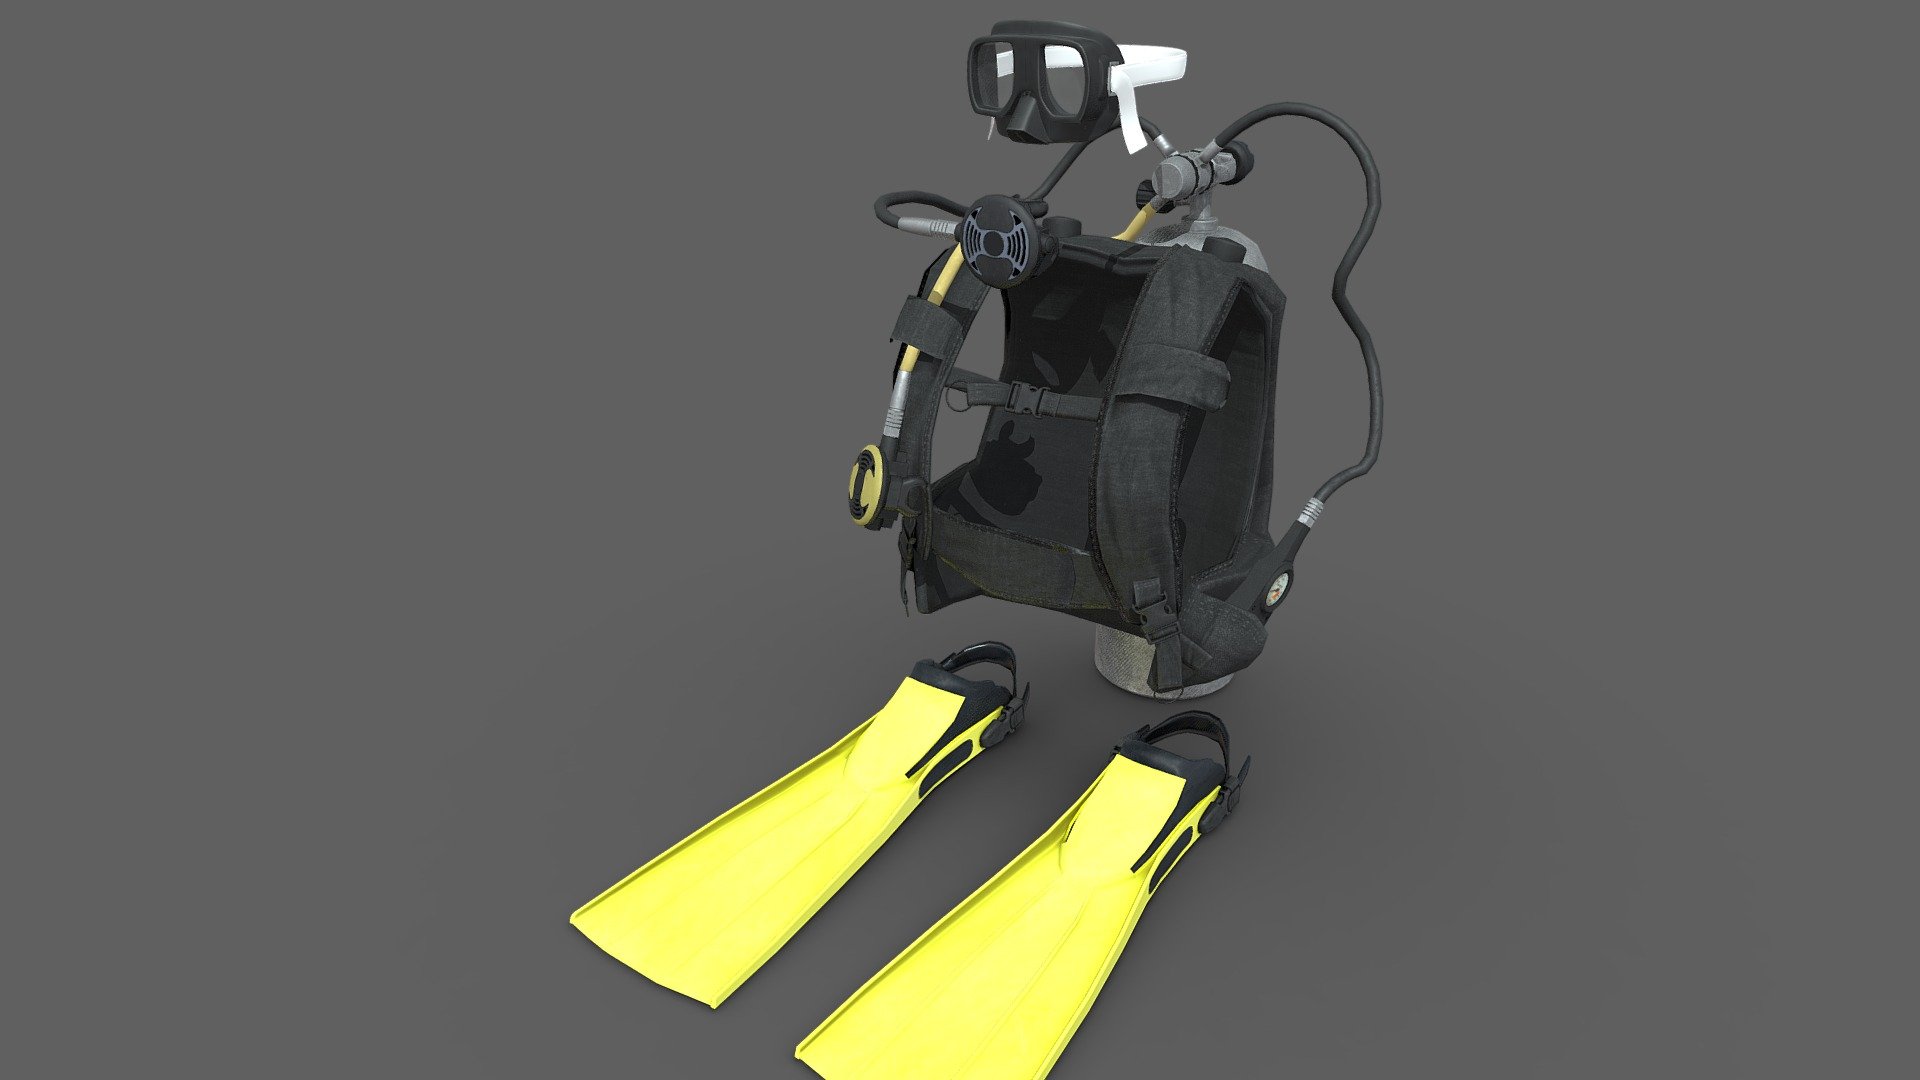 DIVING EQUIPMENT

File




Blender 3.6

USDz

FBX

OBJ

GLTF

7 PBR Materials

38 Textures - 4k.png - PBR Textures (Color, Roughness, Metallic, Normal, Specular, AO)

VIDEO : https://youtu.be/OS6CGxoBtEI

If you need any help with the model, do not hesitate to contact us so that we can give you support 3d model